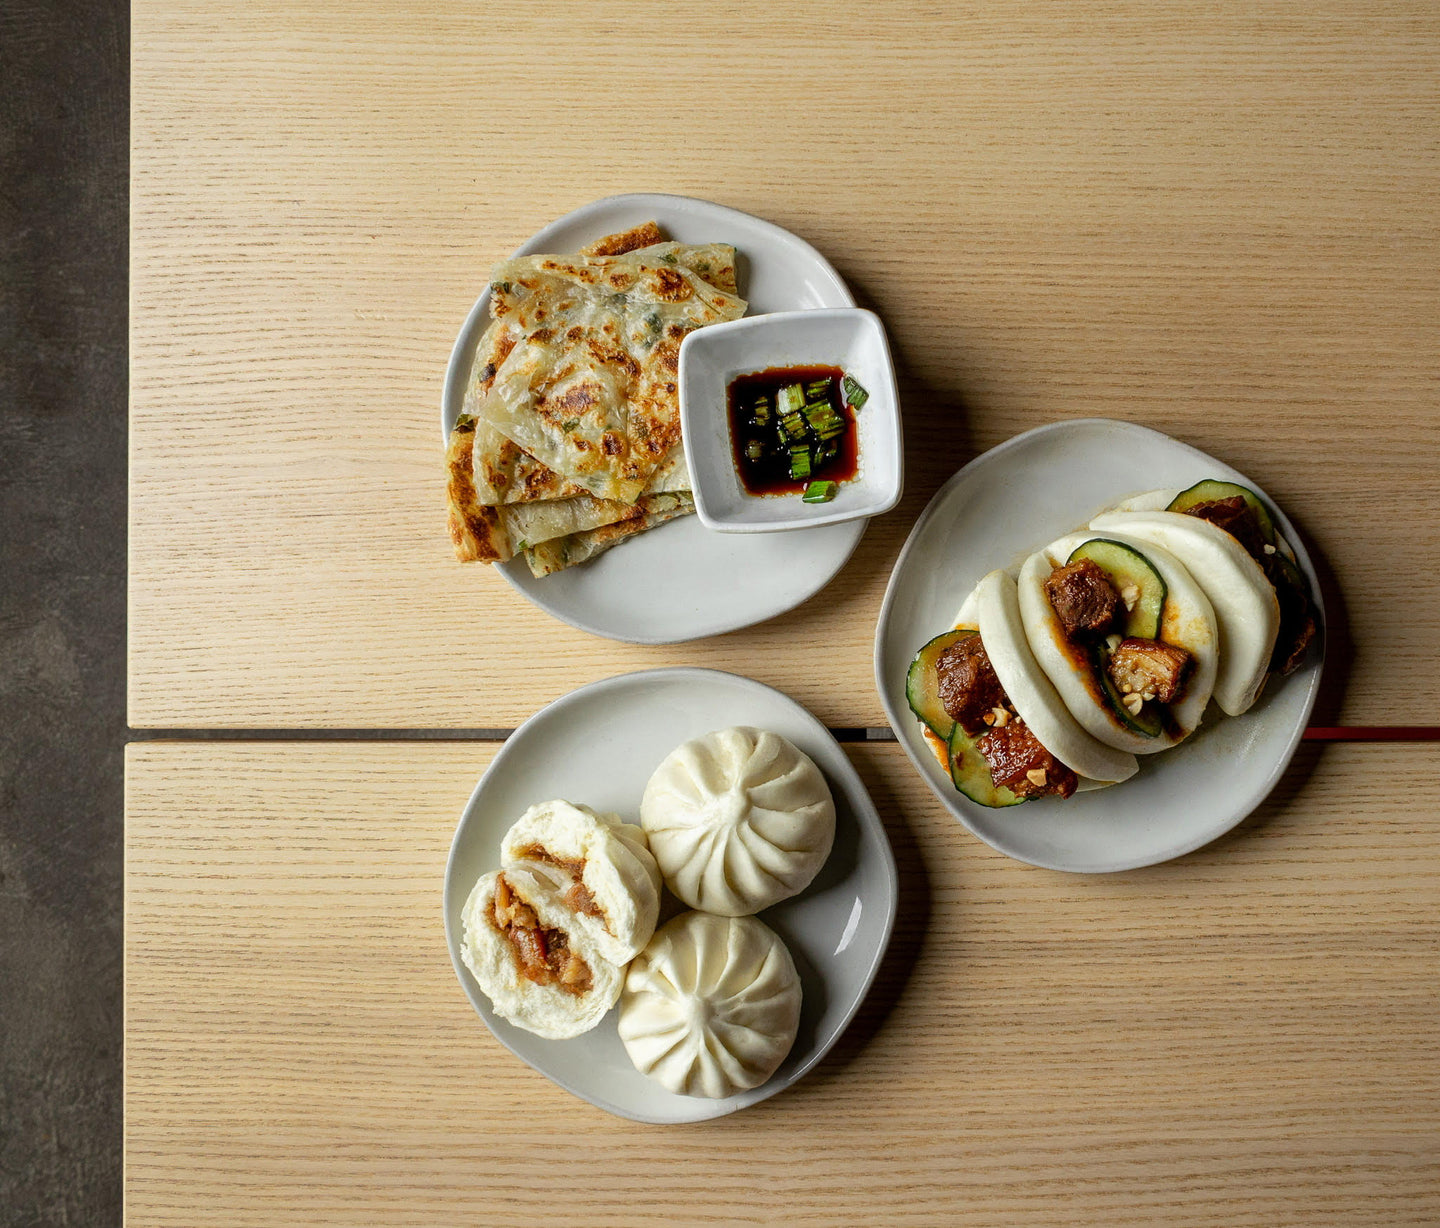 Food lineup from Spring 2023 including Spring Onion Pancakes with a side of soy sauce, Steamed Buns, and Pork Belly Bao Buns.